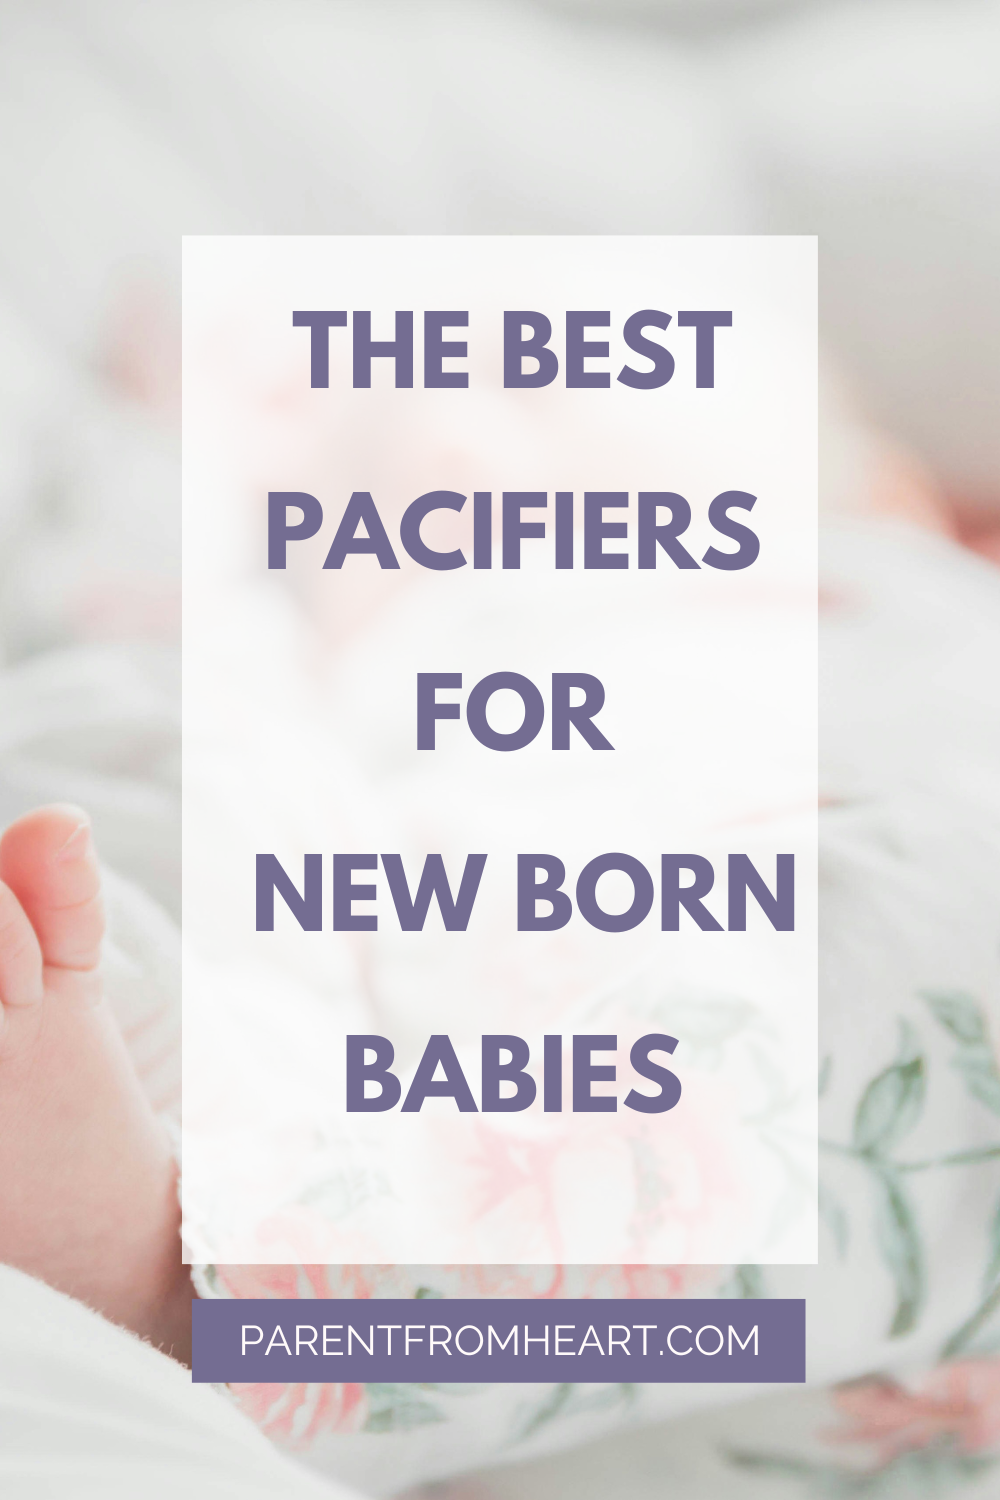 The Best Pacifiers for Newborn Babies